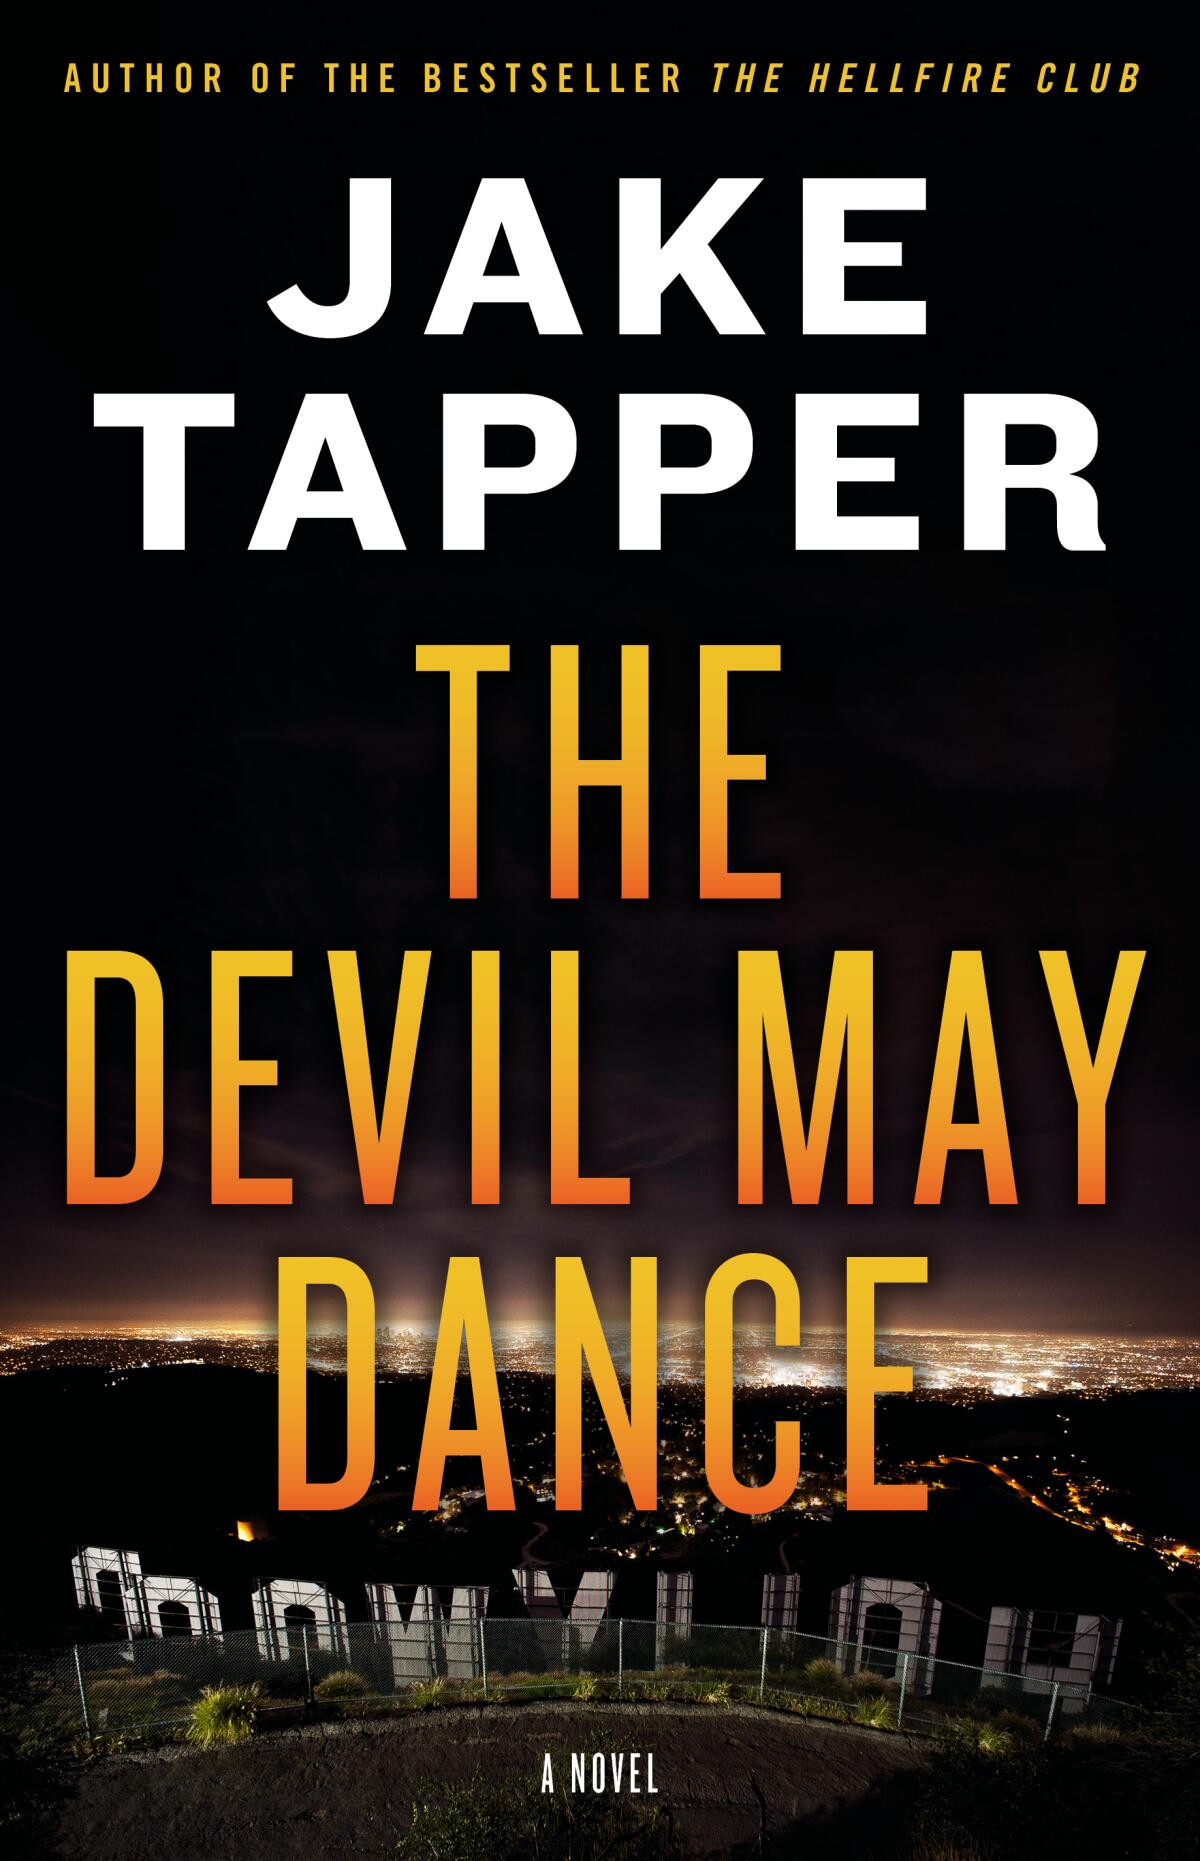 "The Devil May Dance," by Jake Tapper.